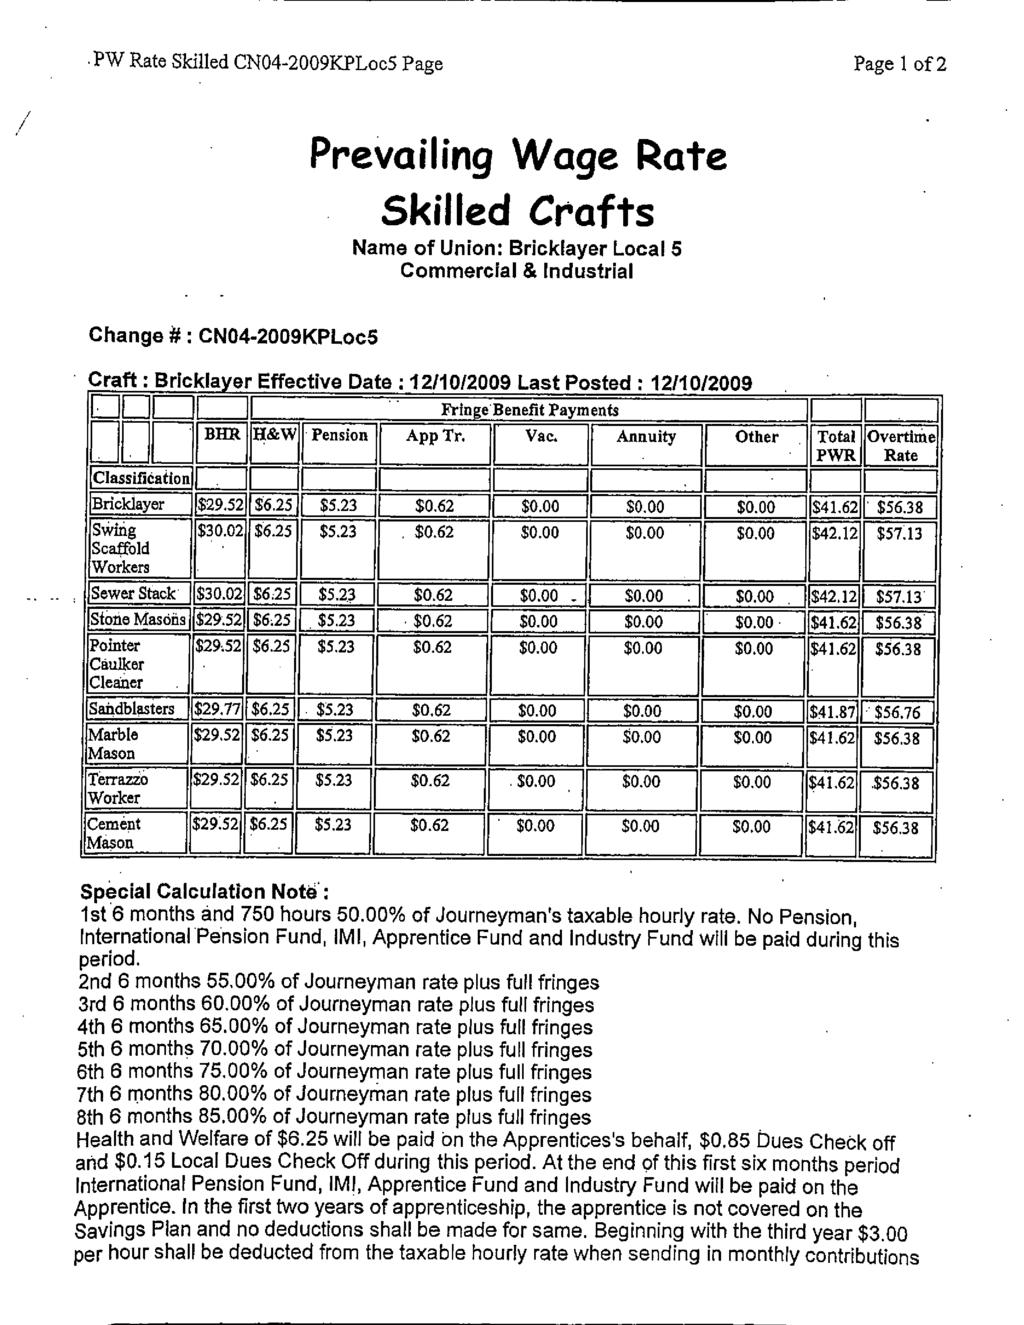 PW Rate Skilled CNO4-2009KPLoc5 Page Page 1 of 2 Prevailing Wage Rate Skilled Crafts Name of Union: Bricklayer Local 5 Commercial & Industrial Change # CNO4-2009KPLoc5 Craft : Bricklayer Effective